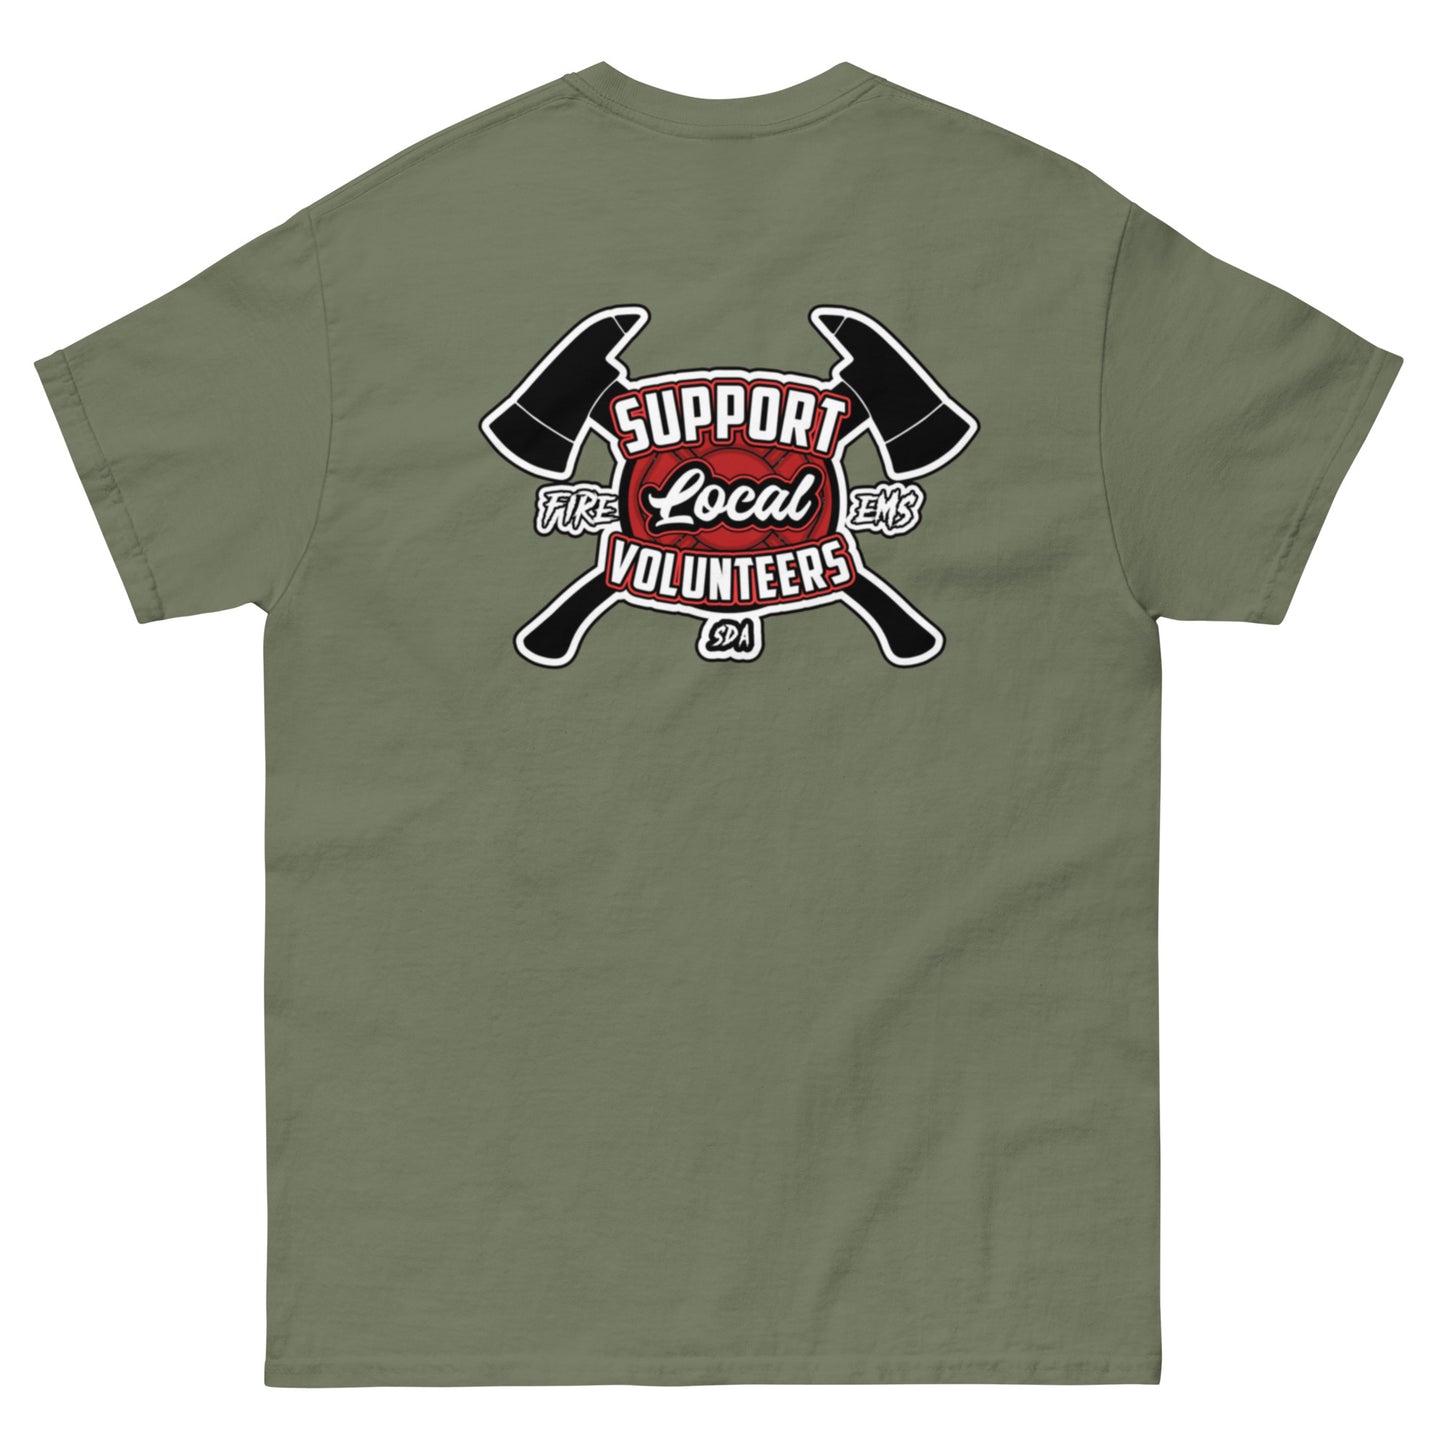 Support Volunteers Shield and Axes classic tee